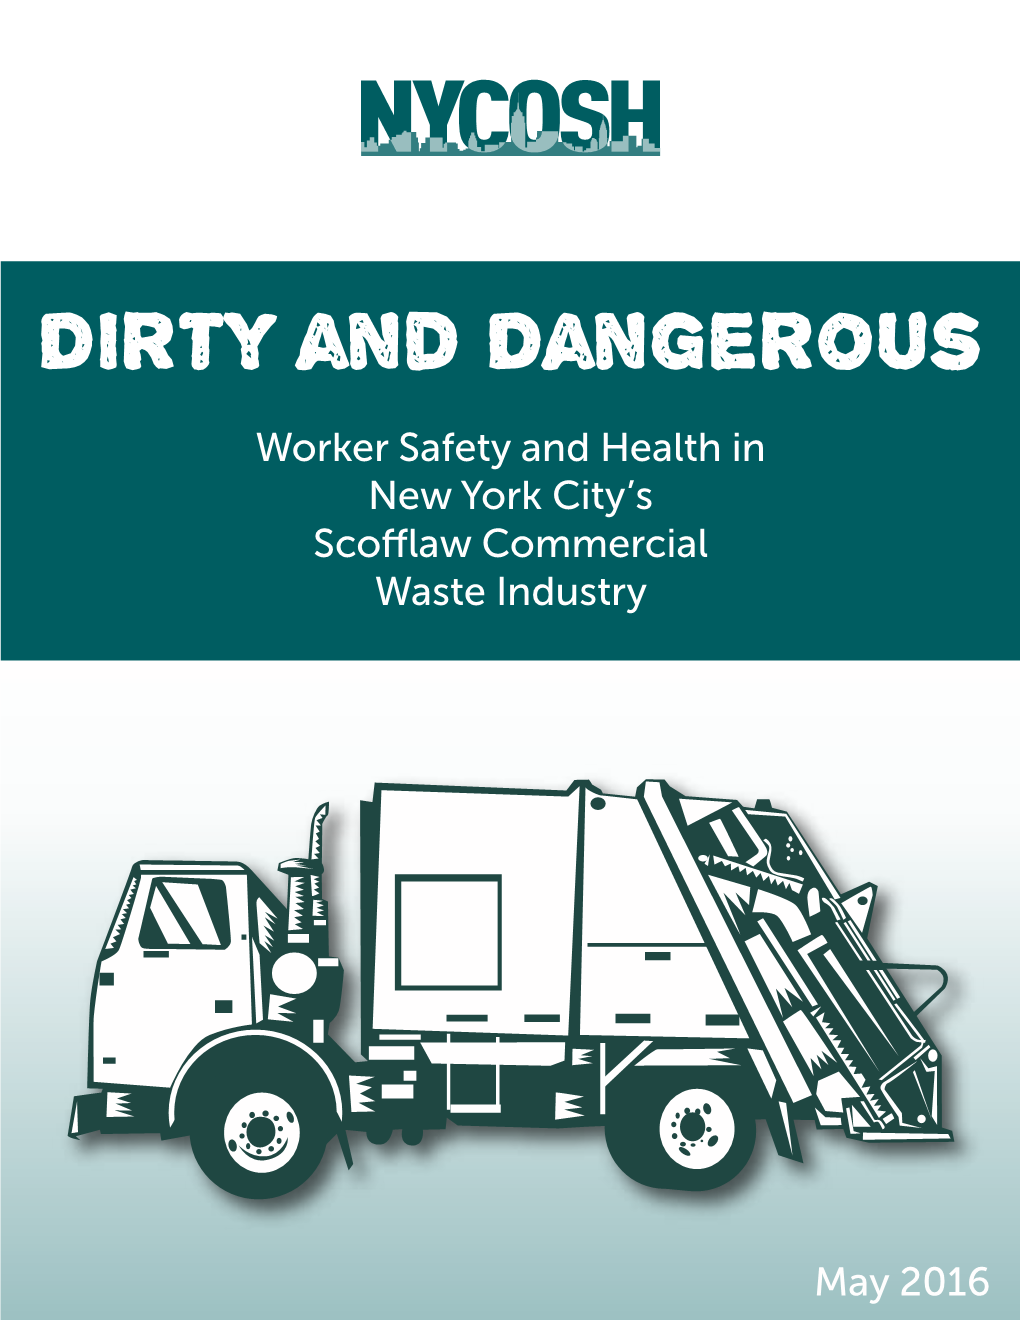 Worker Safety and Health in New York City's Scofflaw Commercial Waste